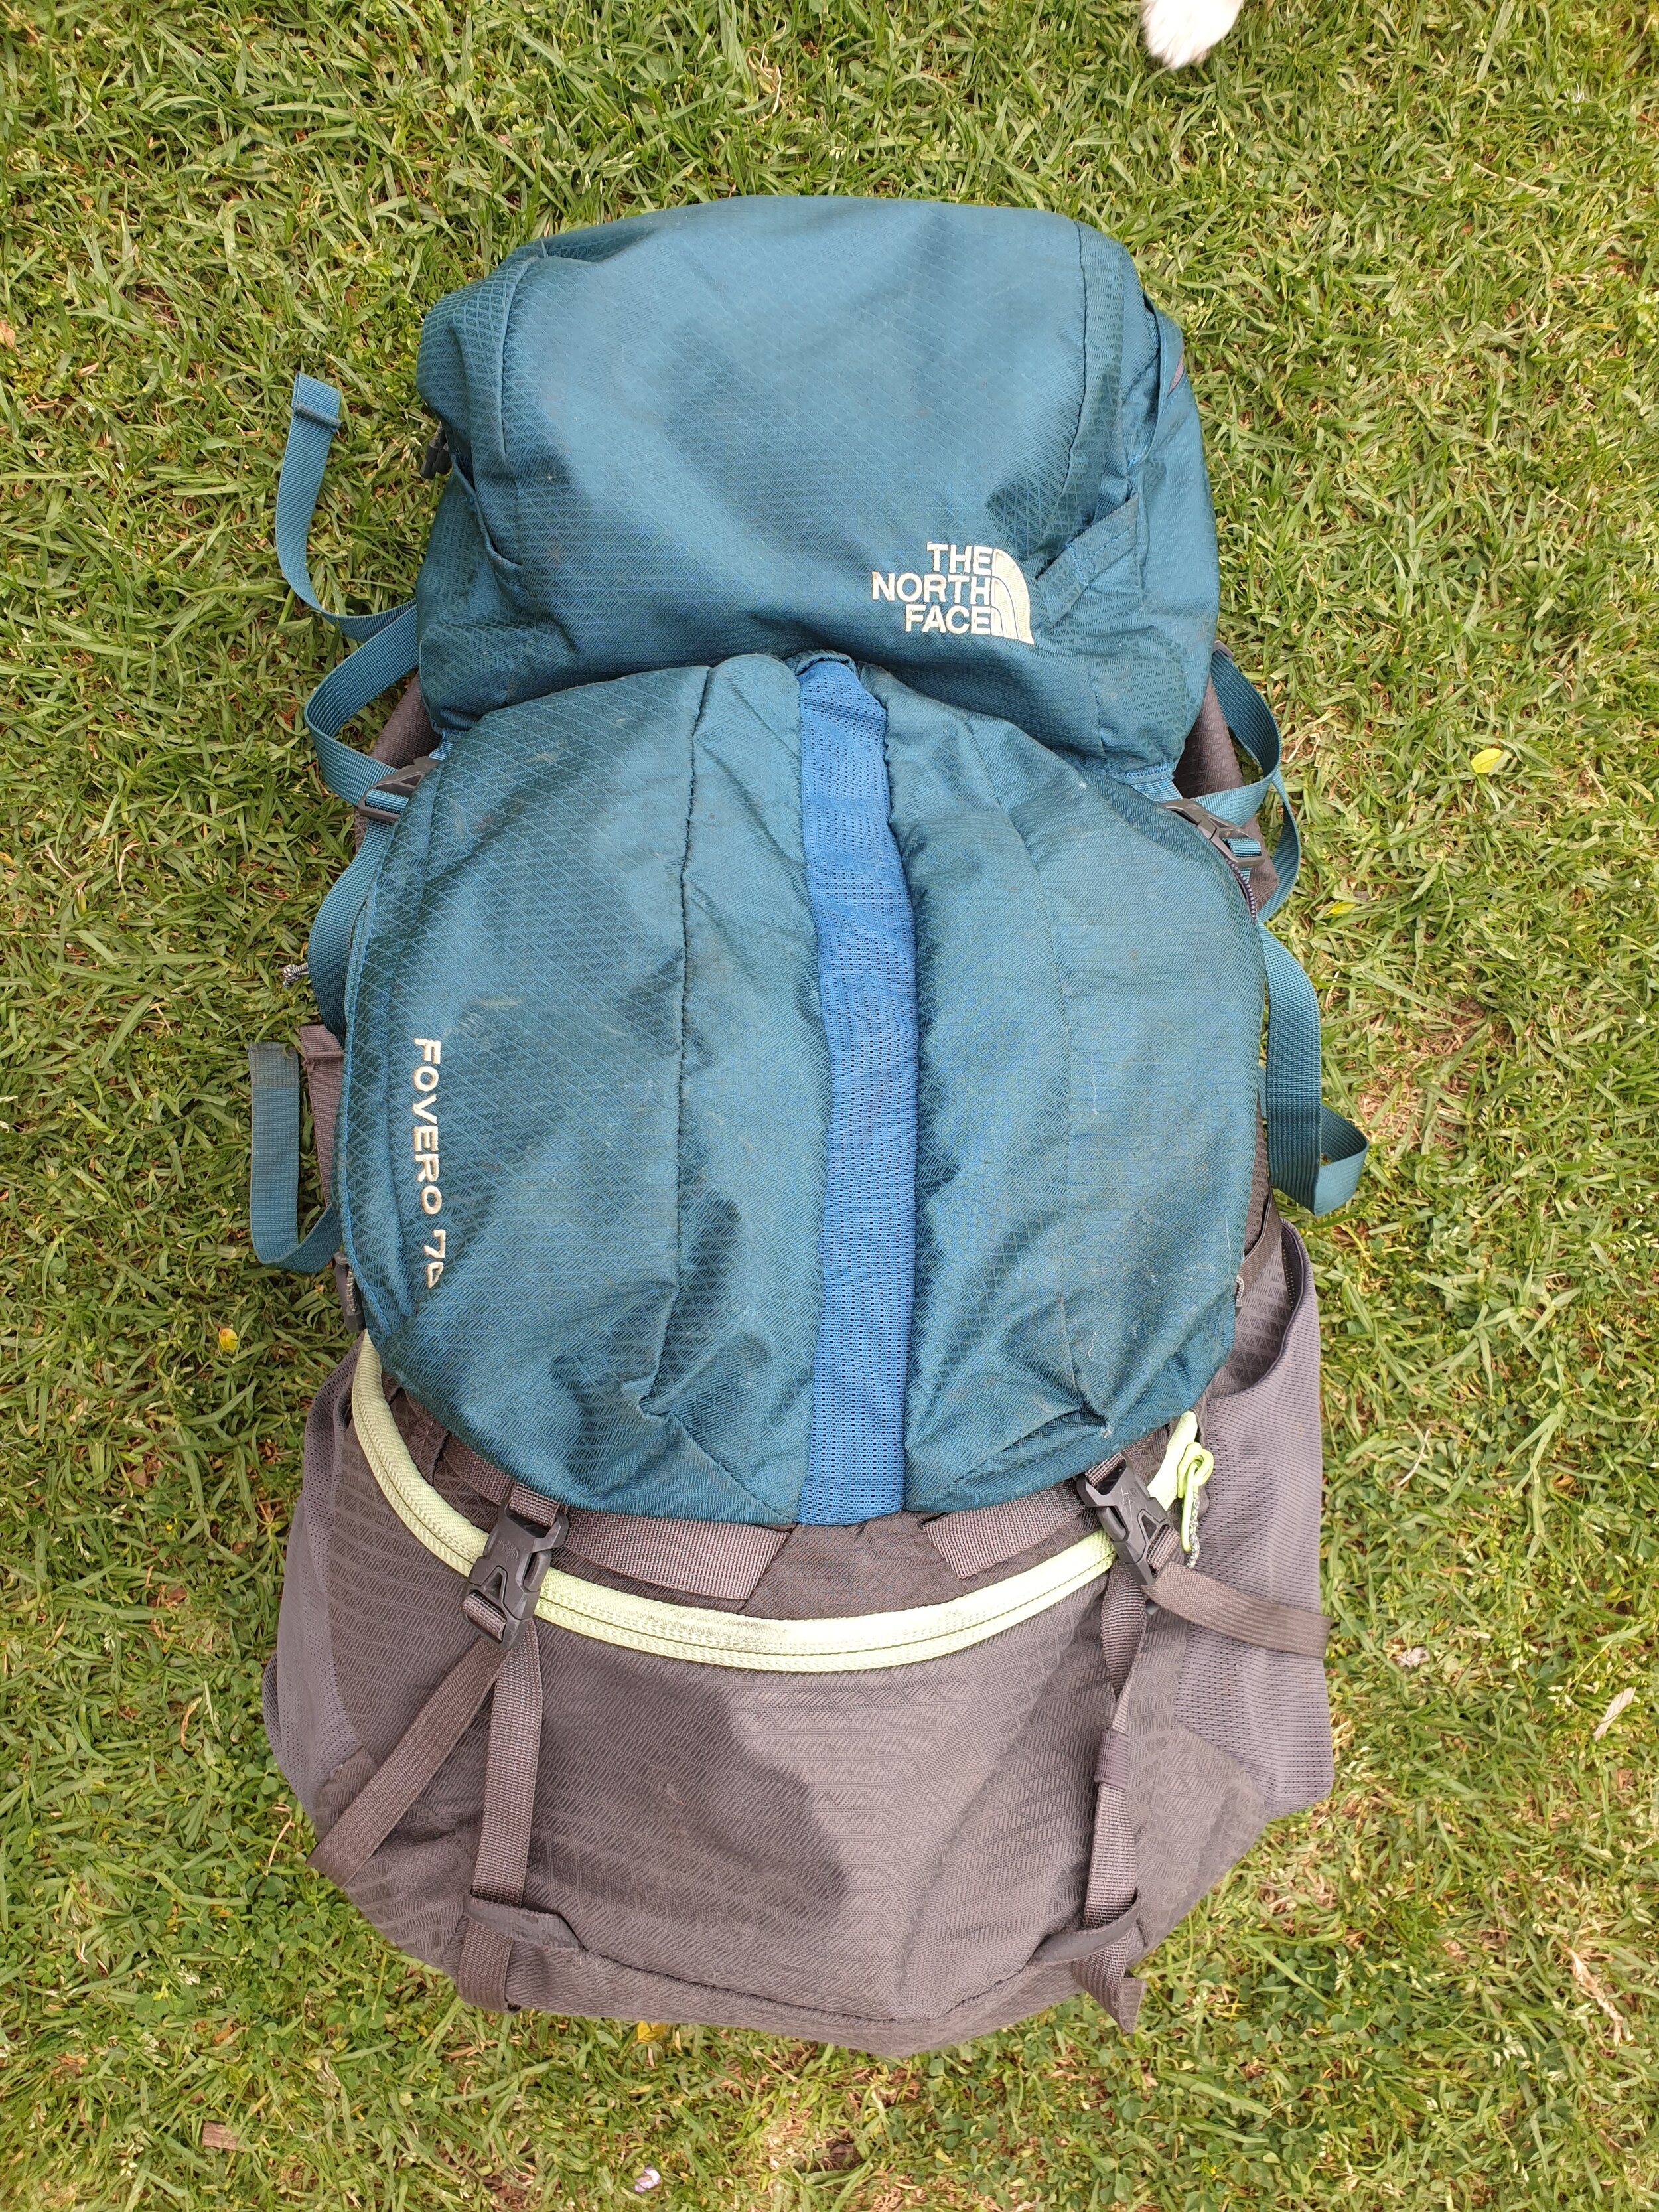 the north face backpack 70l